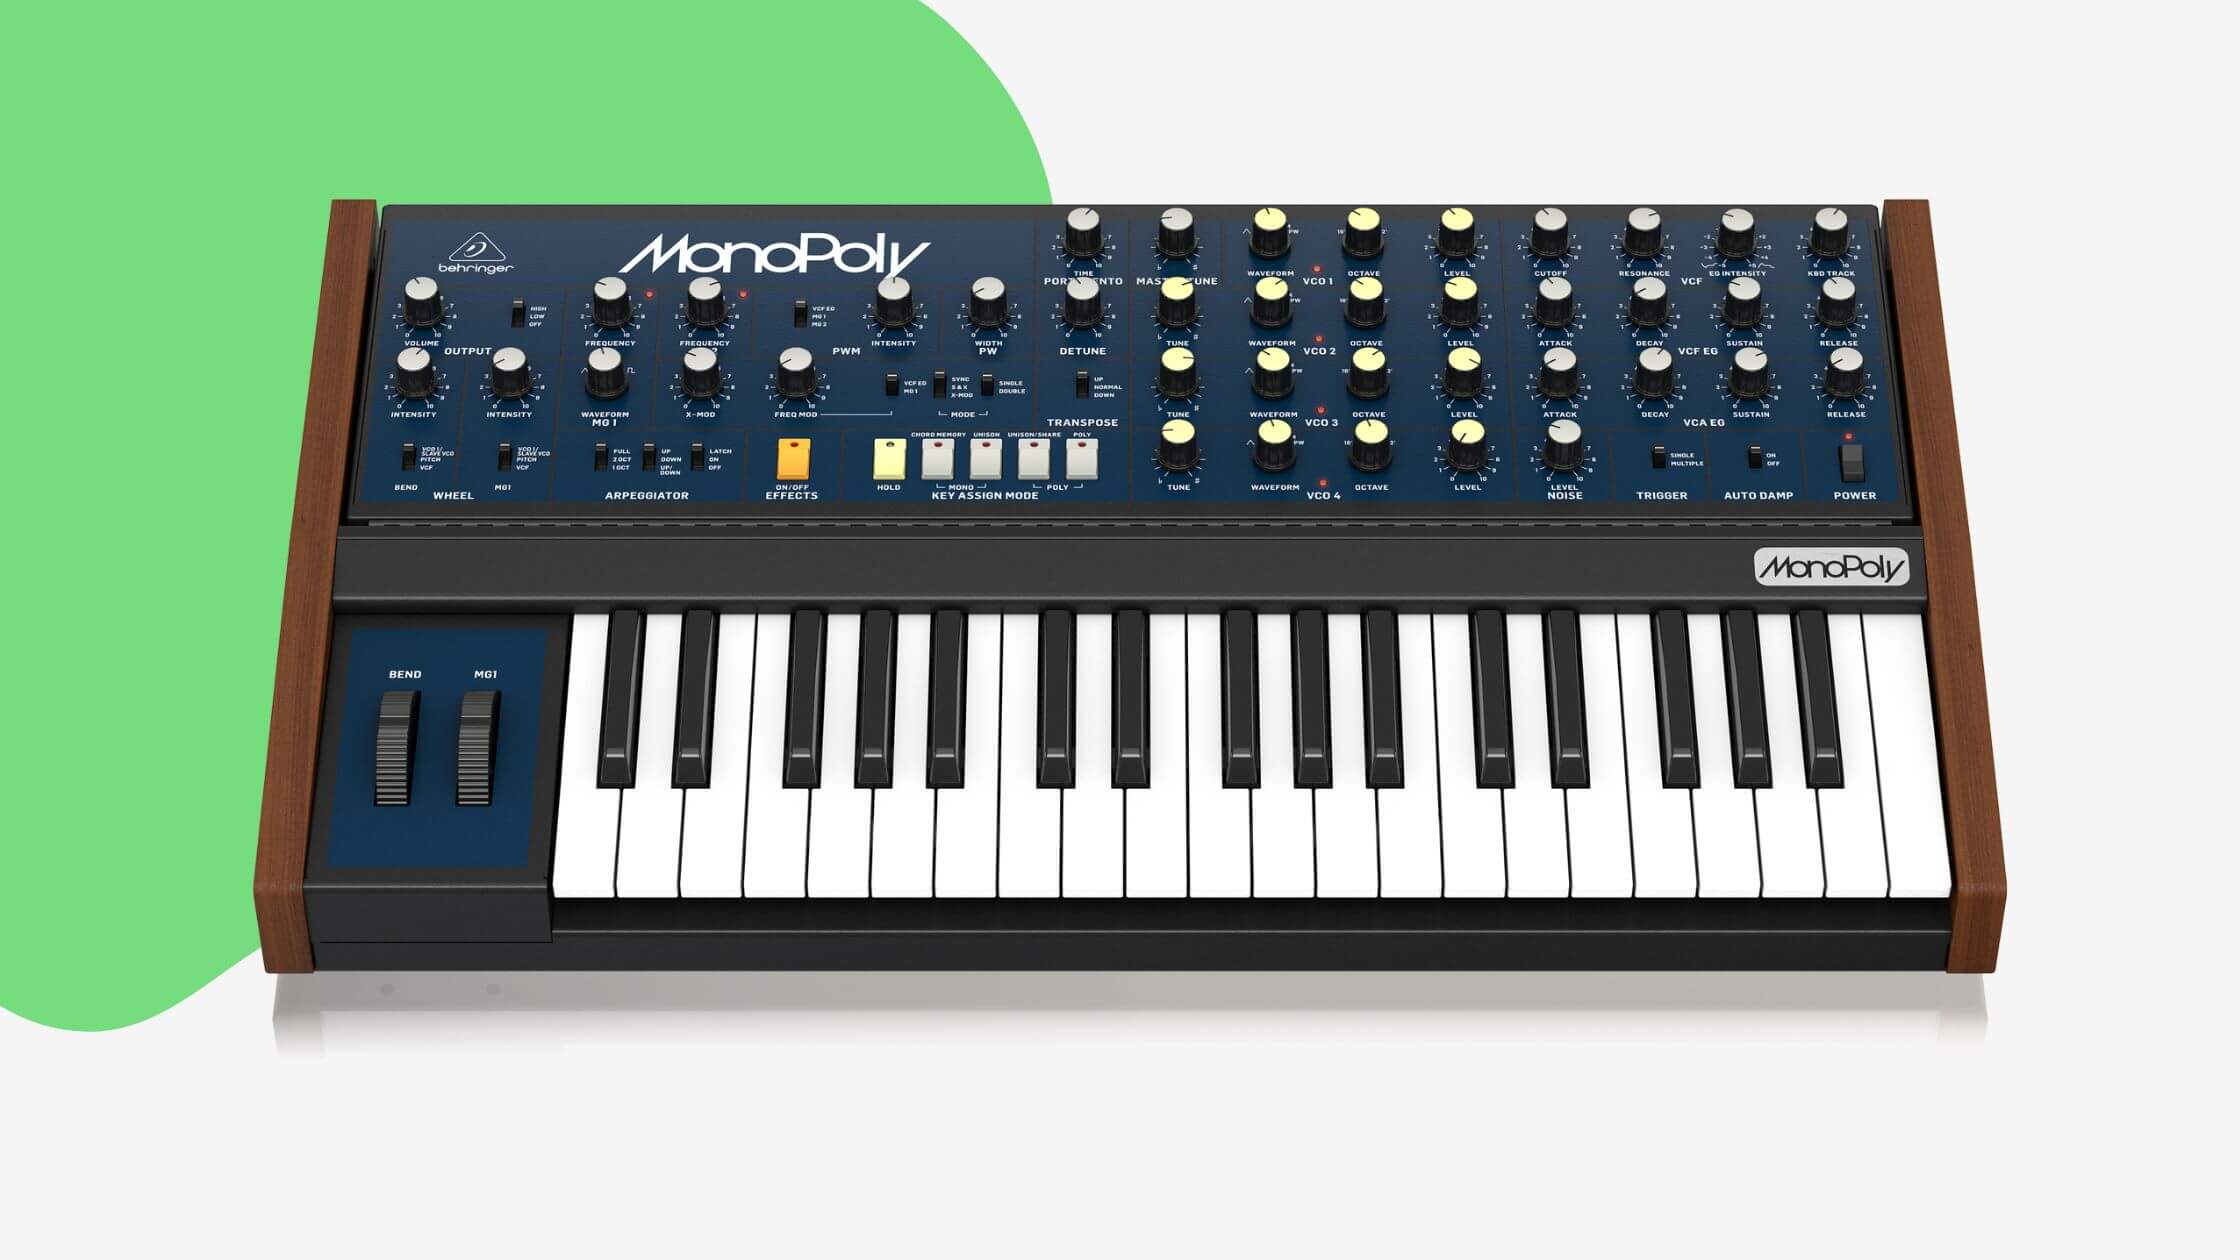 Behringer announces they’re dropping prices on synth products by up to 60%